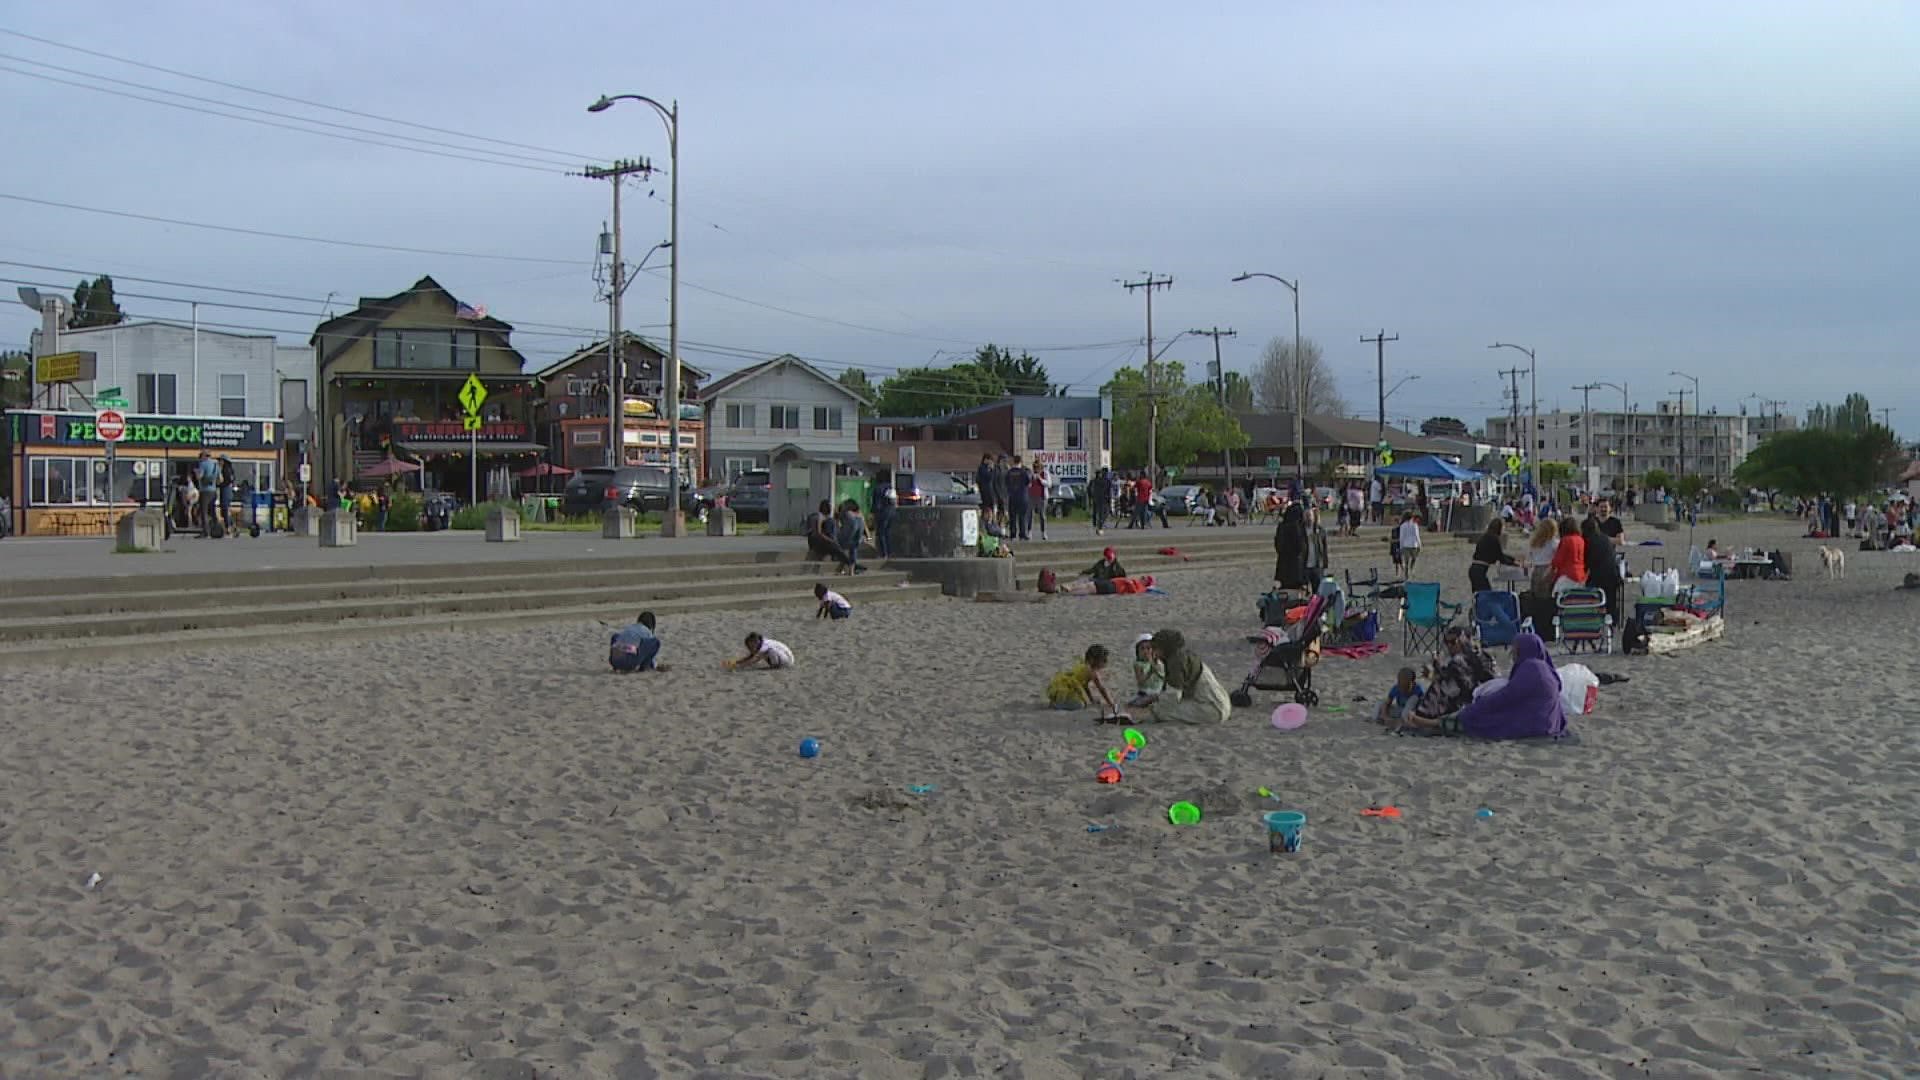 Seattle Parks staff, assisted by Seattle police officers, will begin closing the beaches down starting at 9:30 p.m.